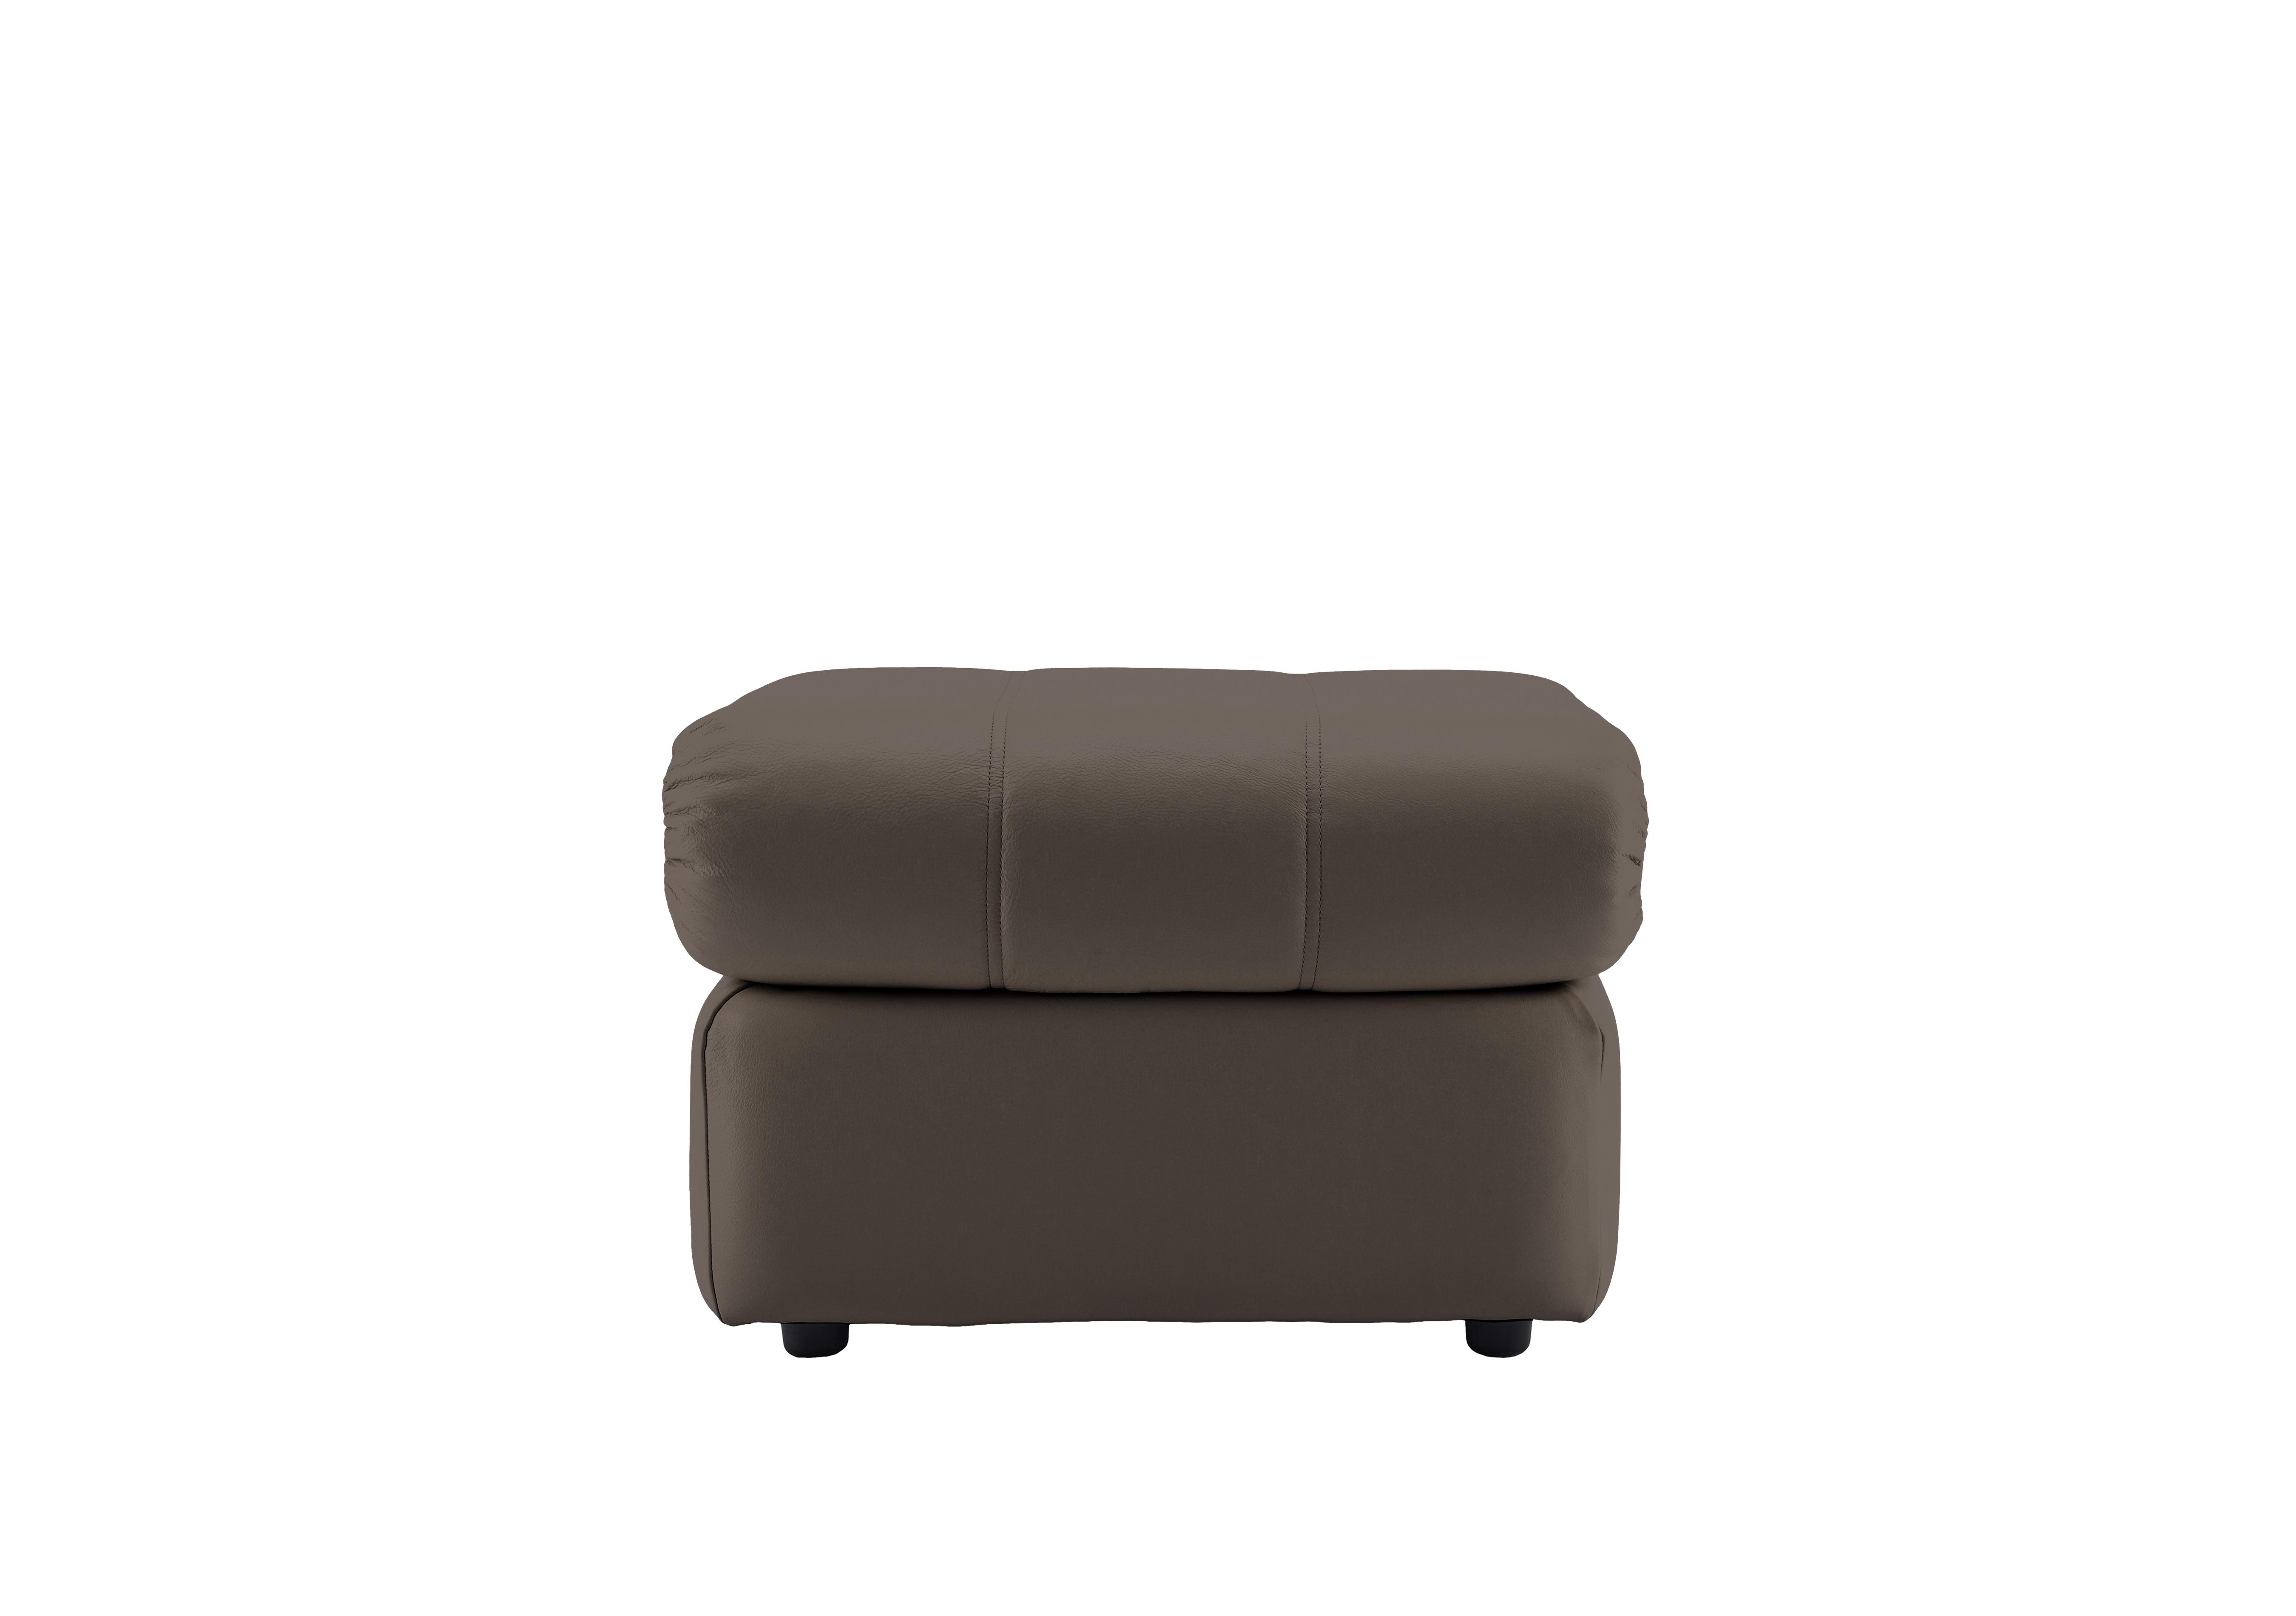 Chloe Leather Footstool in P232 Capri Taupe on Furniture Village